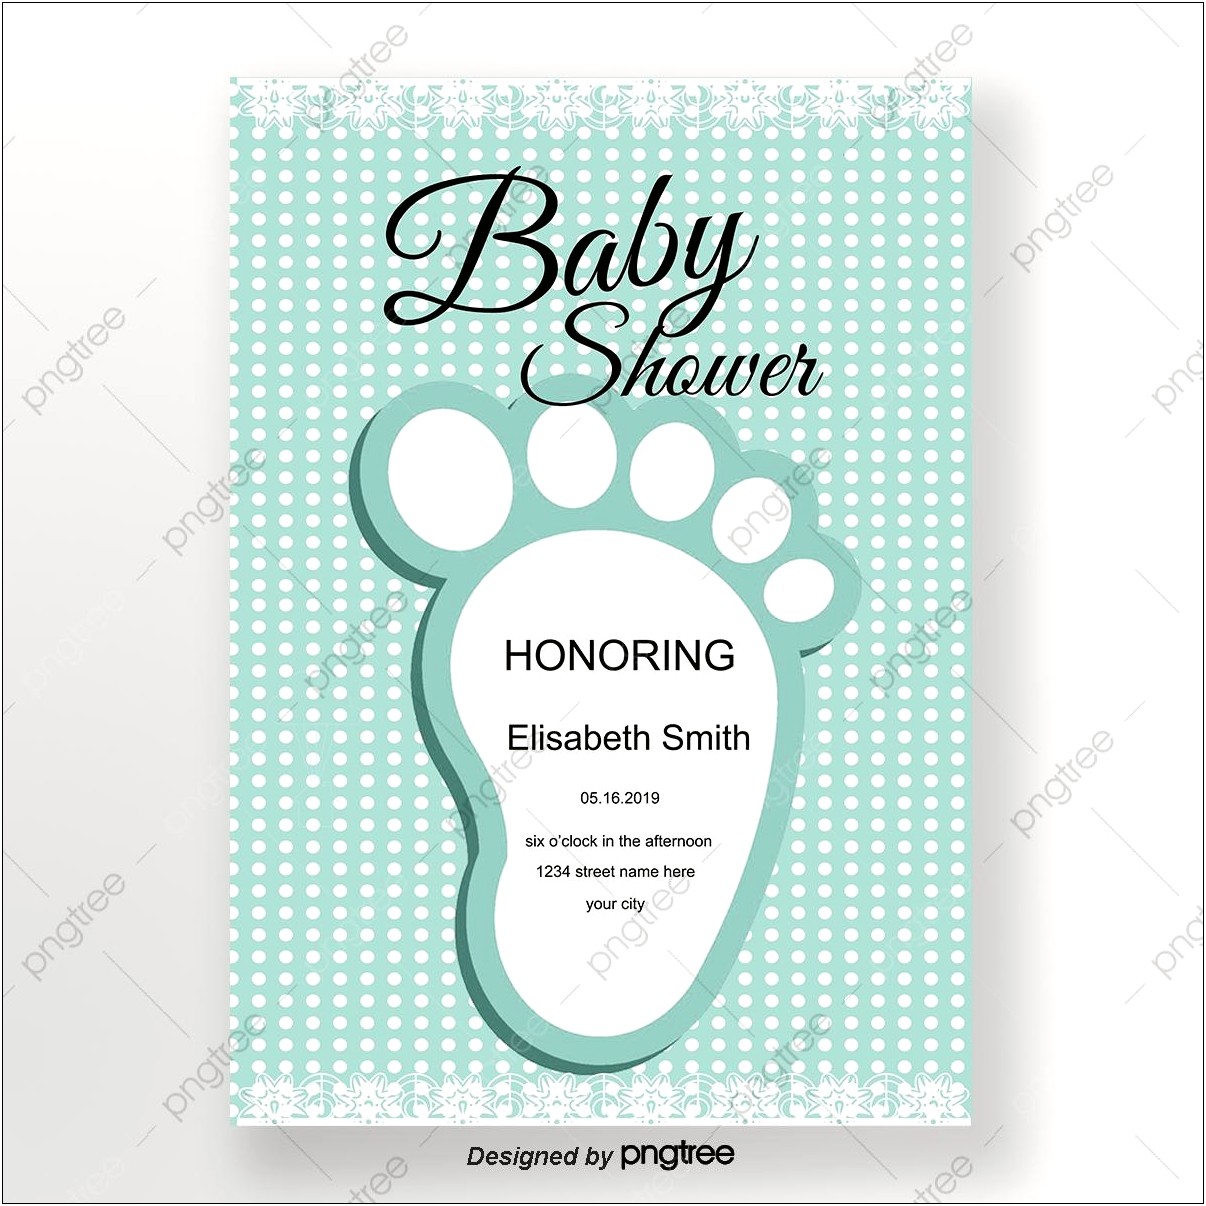 Baby Shower Invitation After Effects Templates Free Download